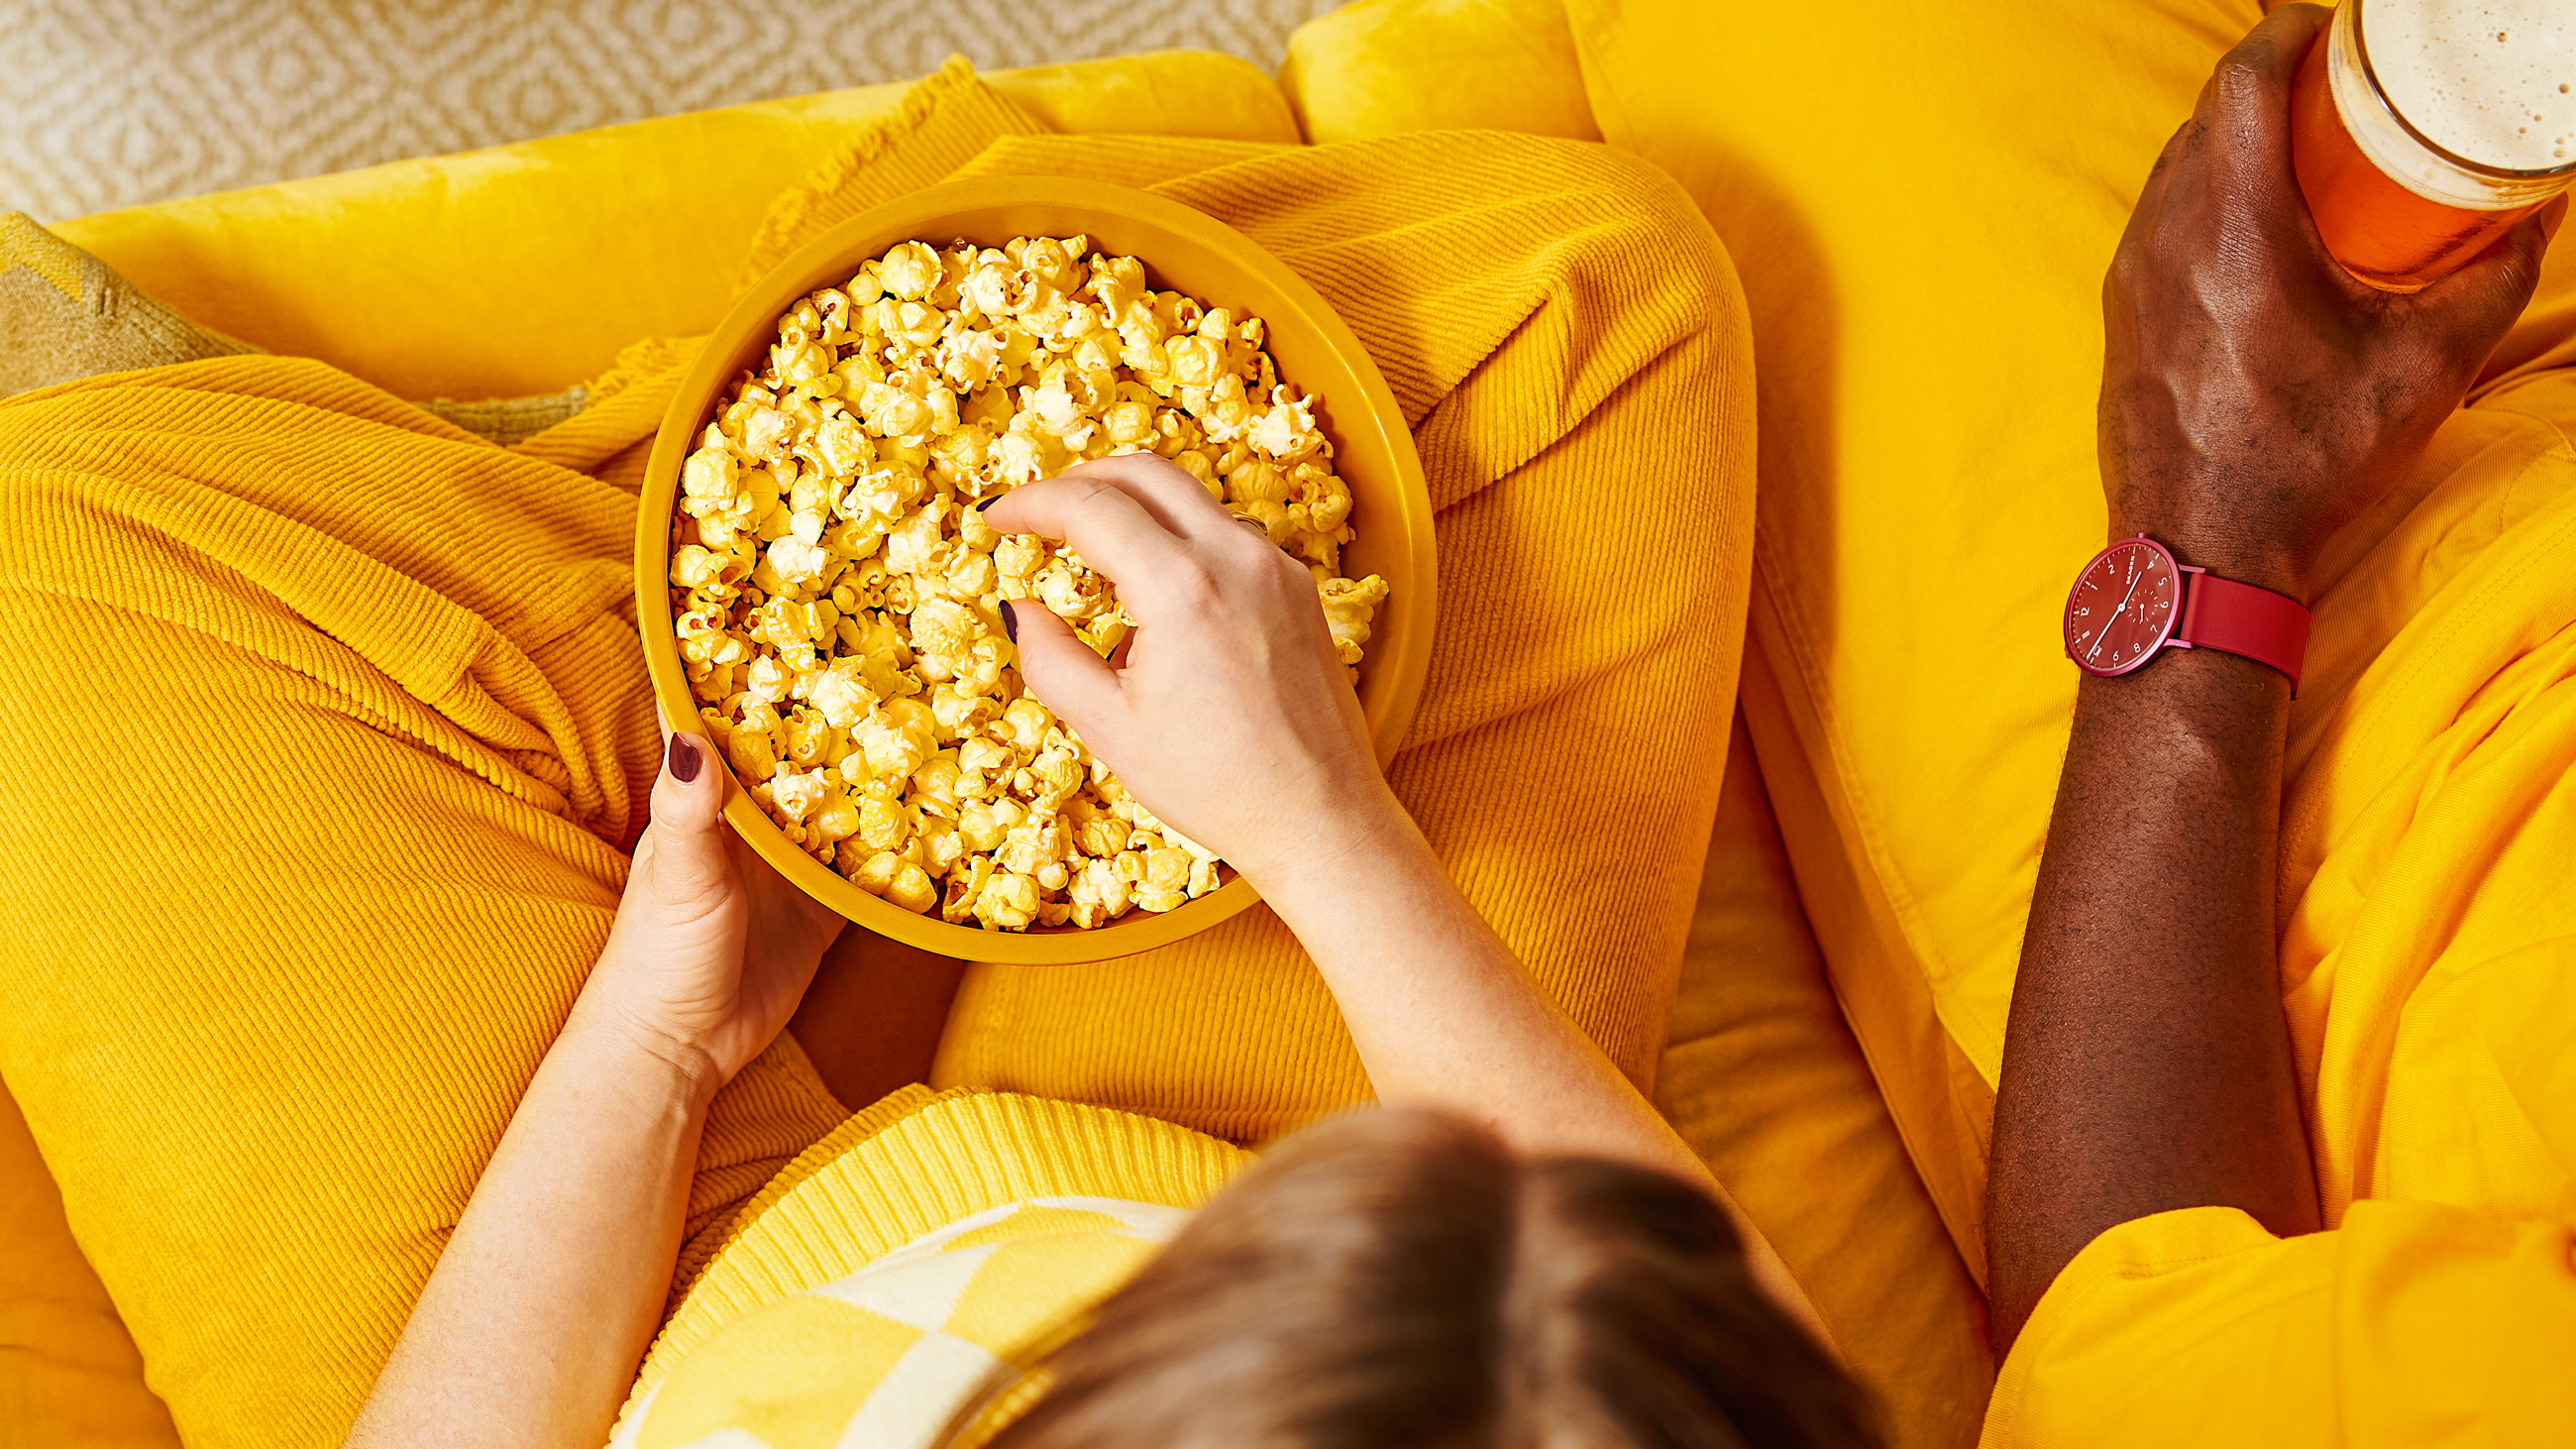 Two people eating bowl of magictime popcorn in yellow bowl with yellow attire.